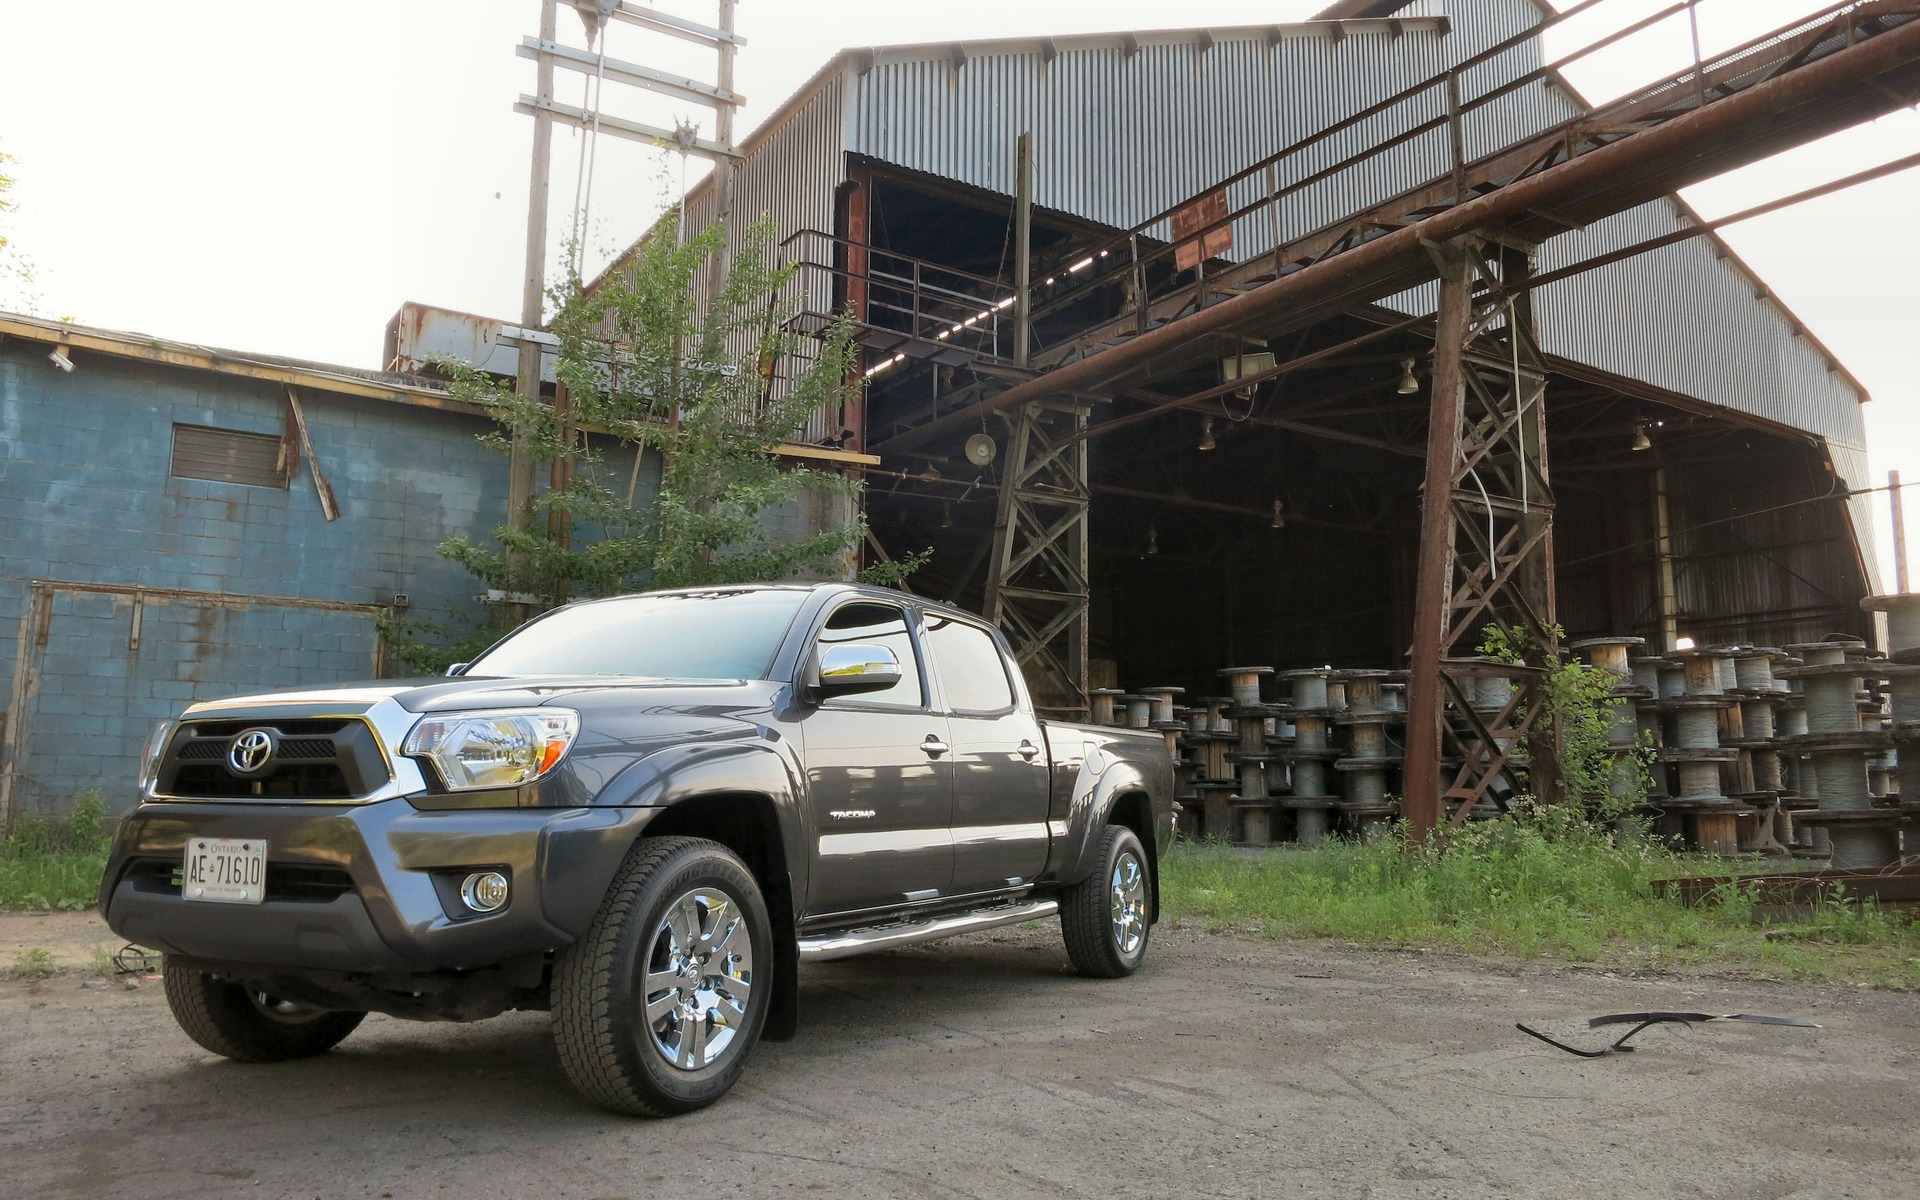 I found myself facing a split decision with the 2015 Toyota Tacoma.